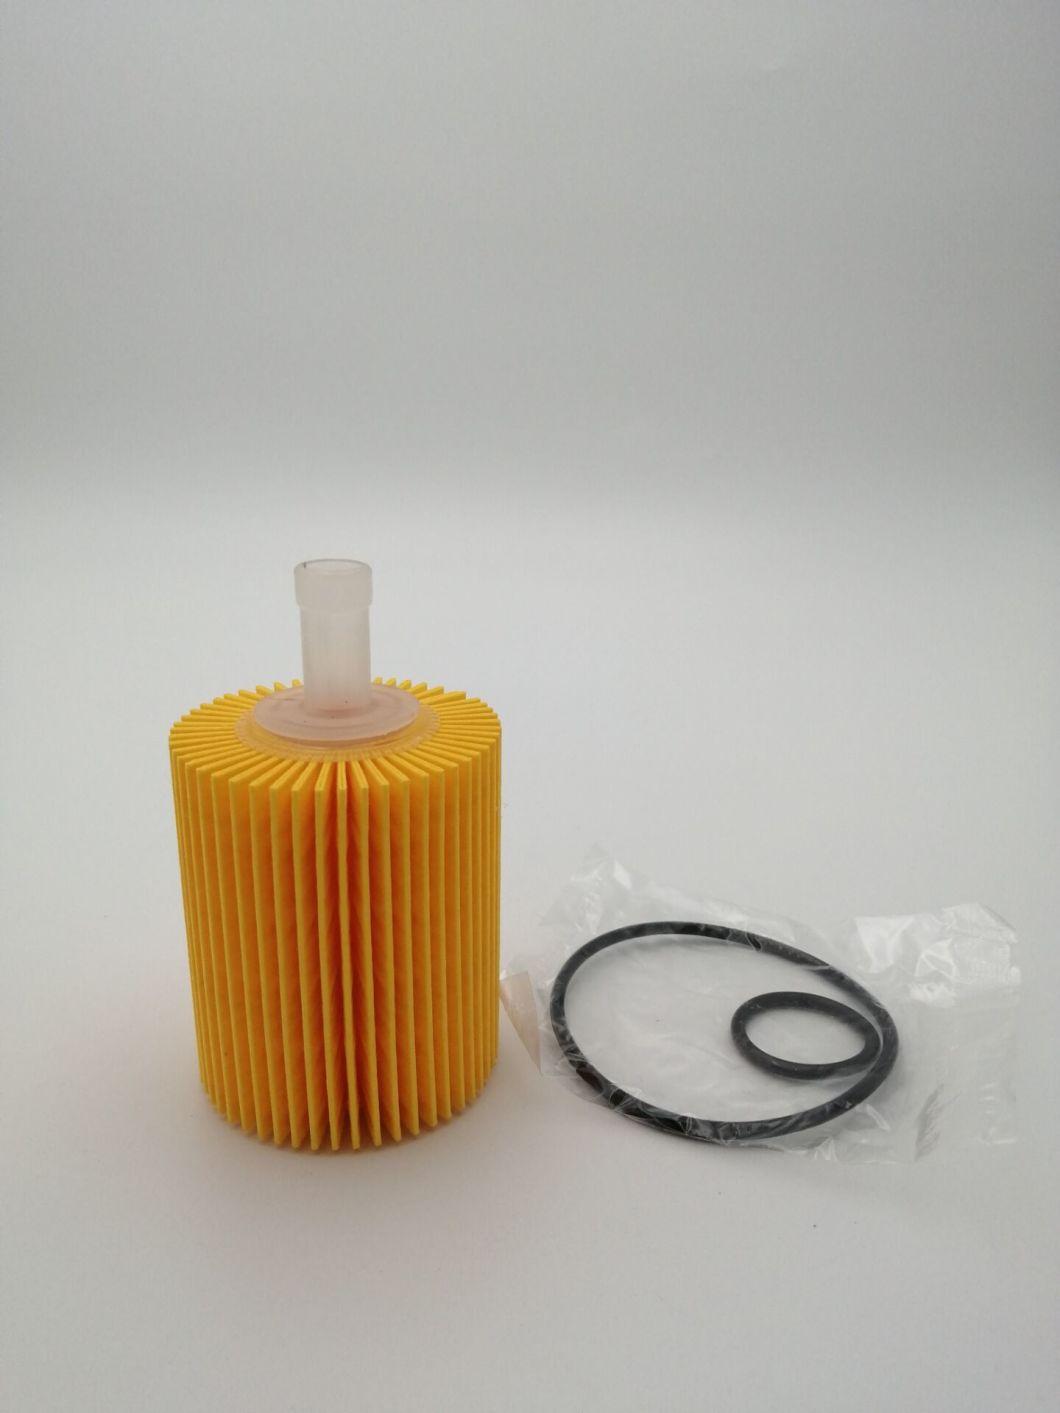 Auto Parts Filter Element Car Parts 04152-31080/Yzza3/Yzza5 Oil Filter for Toyota